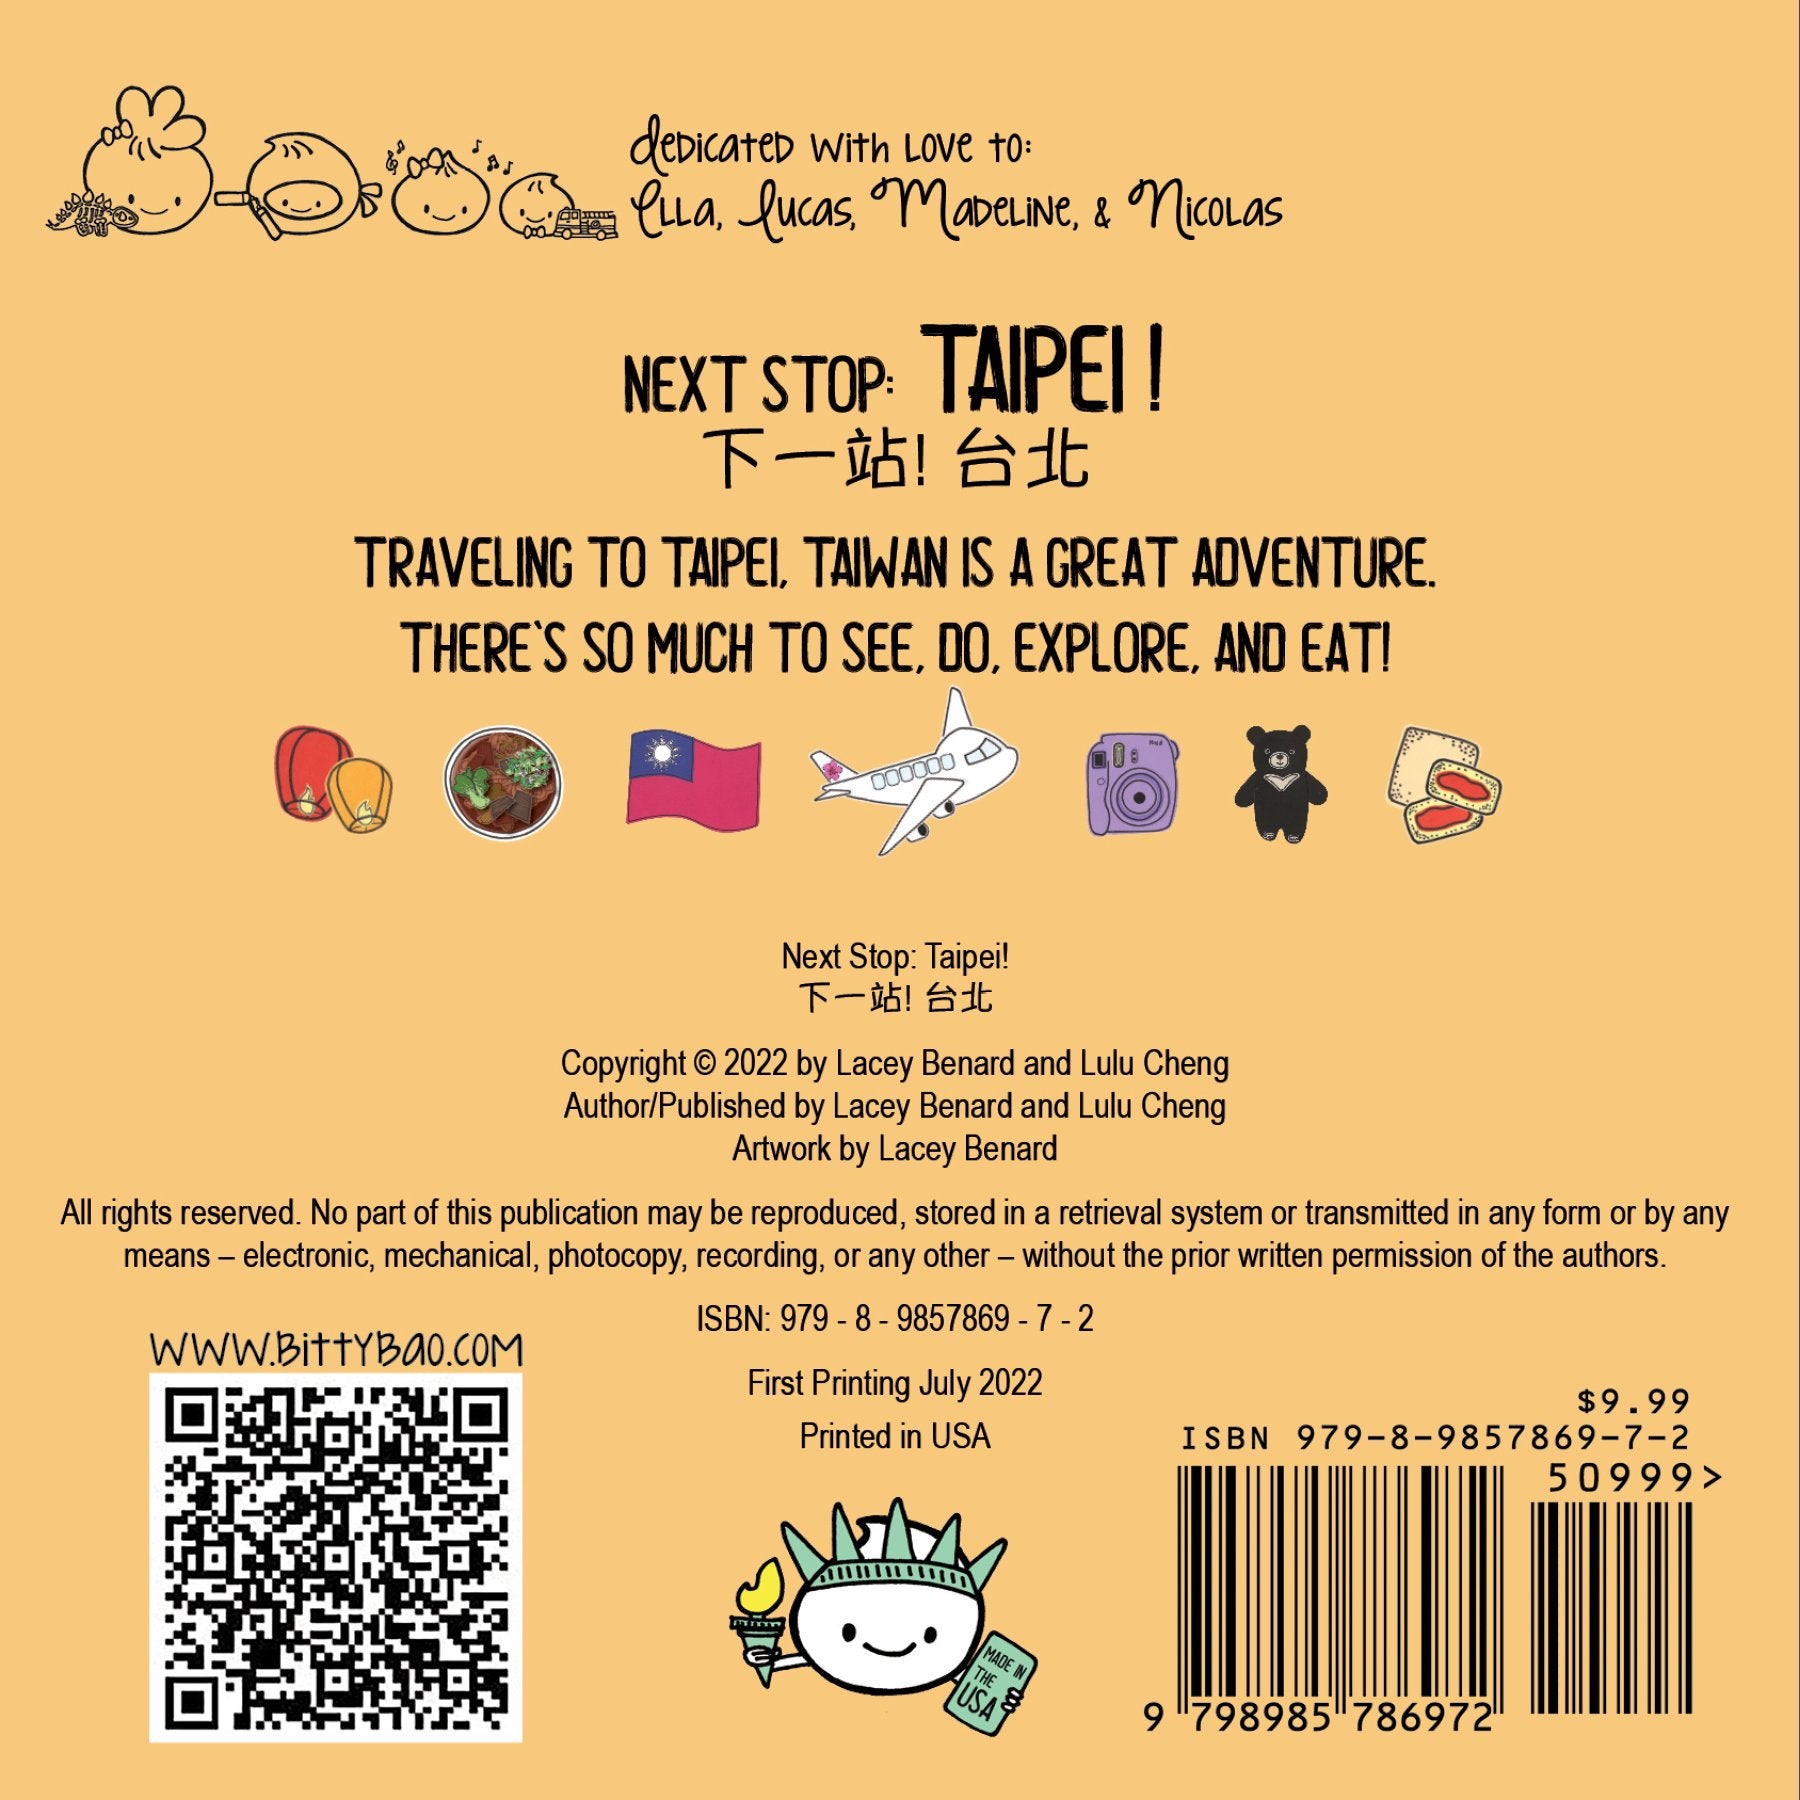 Next Stop: Taipei! 下一站! 台北 backcover. Traveling to Taipei, Taiwan is a great adventure. There's so much to see, do, explore, and eat!